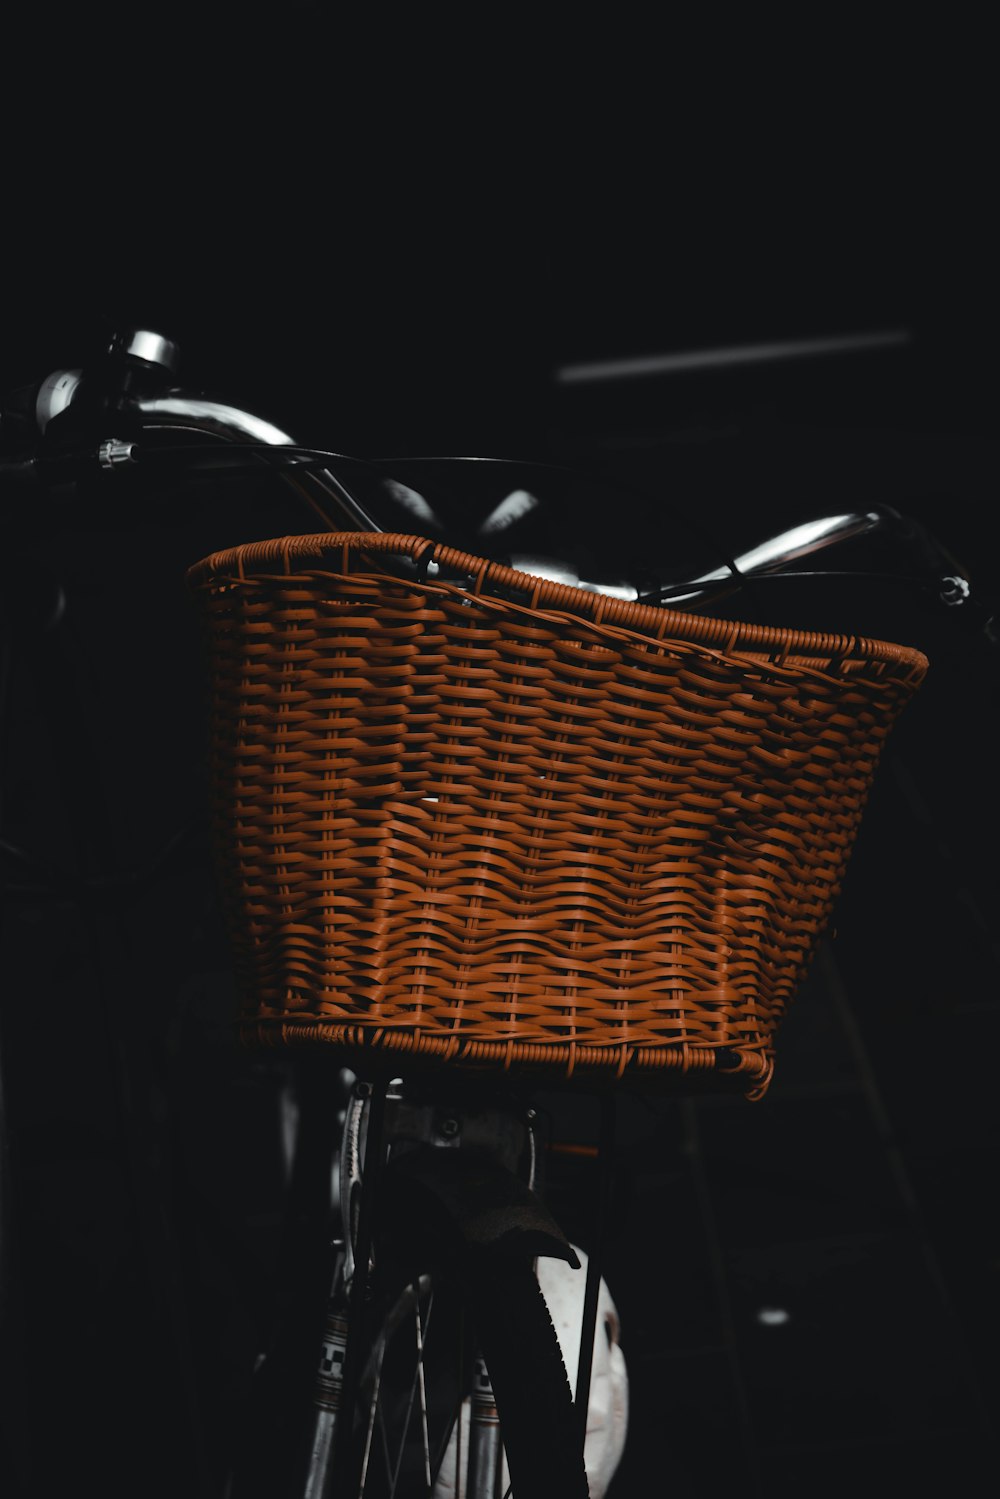 a close up of a bicycle with a basket